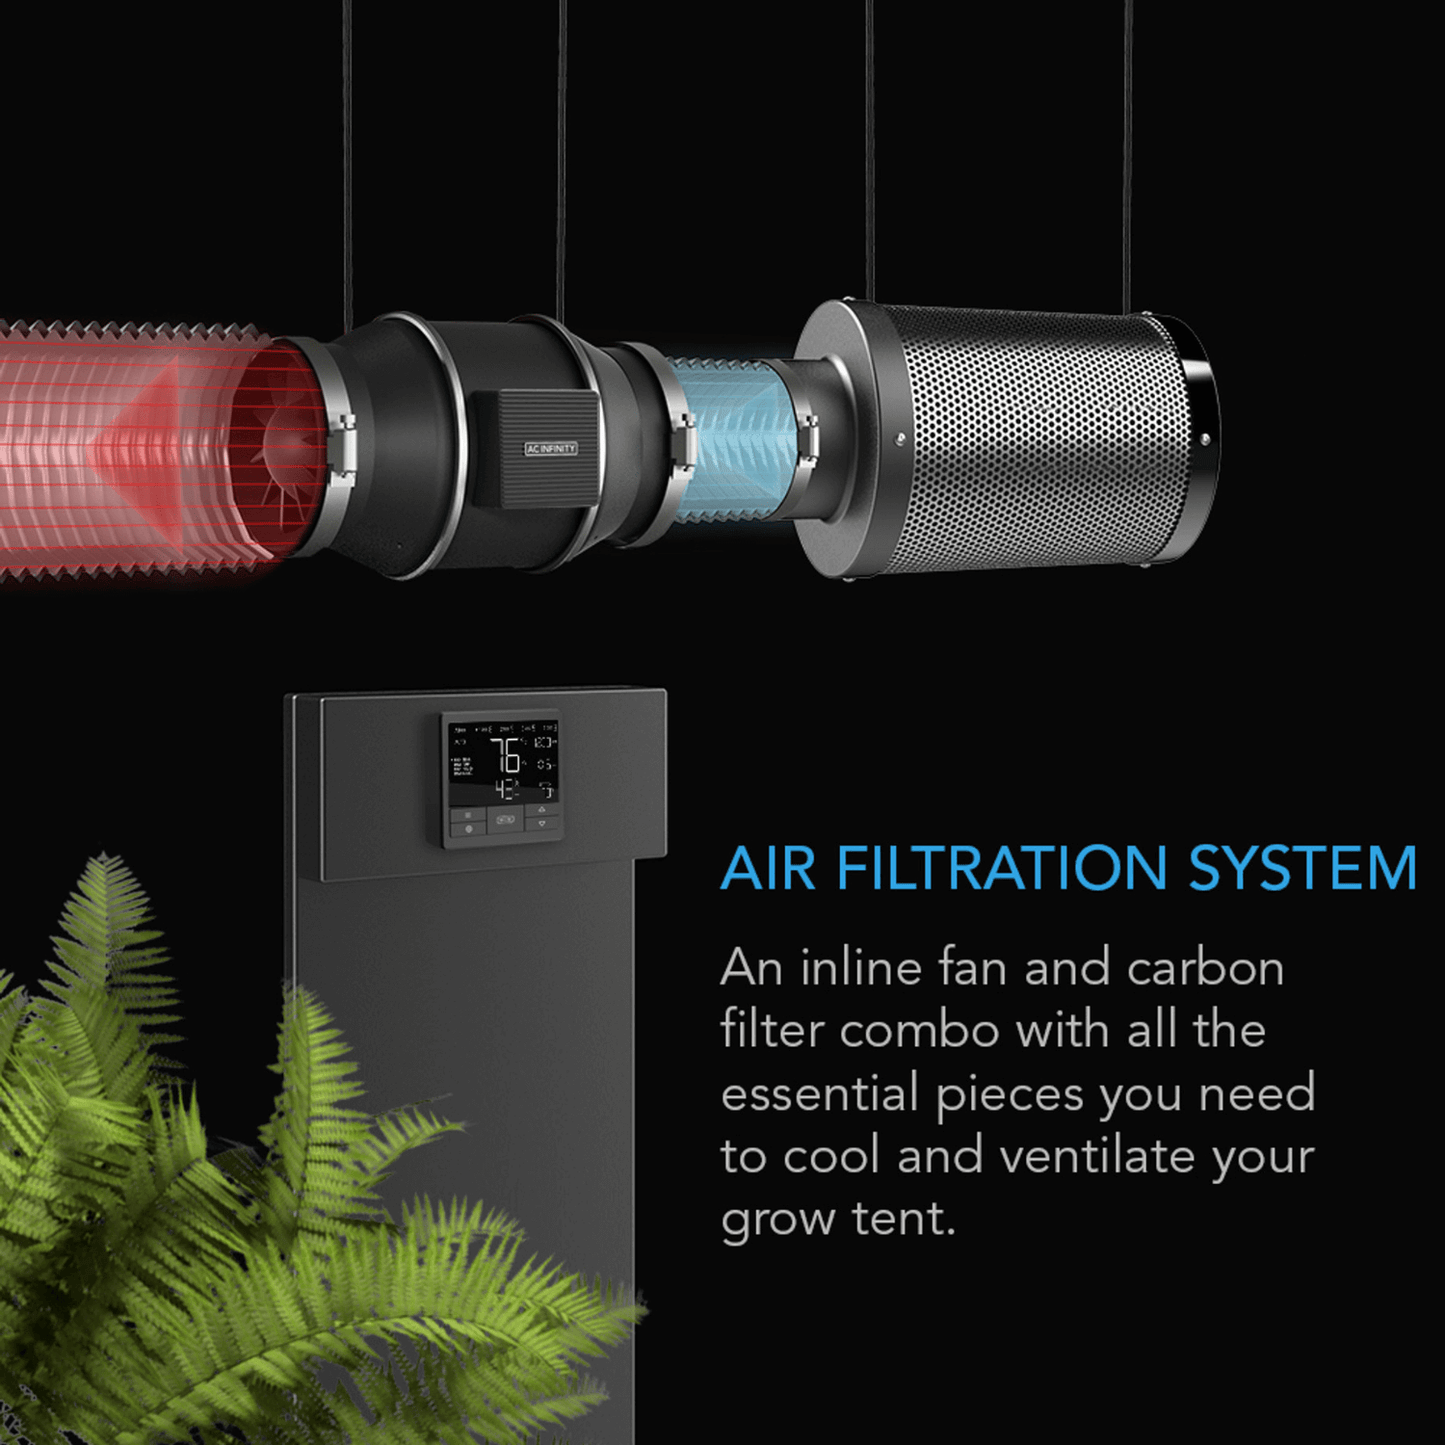 AC Infinity Air Filtration Kit PRO 6", Inline Fan with Smart Controller, Carbon Filter & Ducting Combo AC-FKT6 Ventilation 819137022928